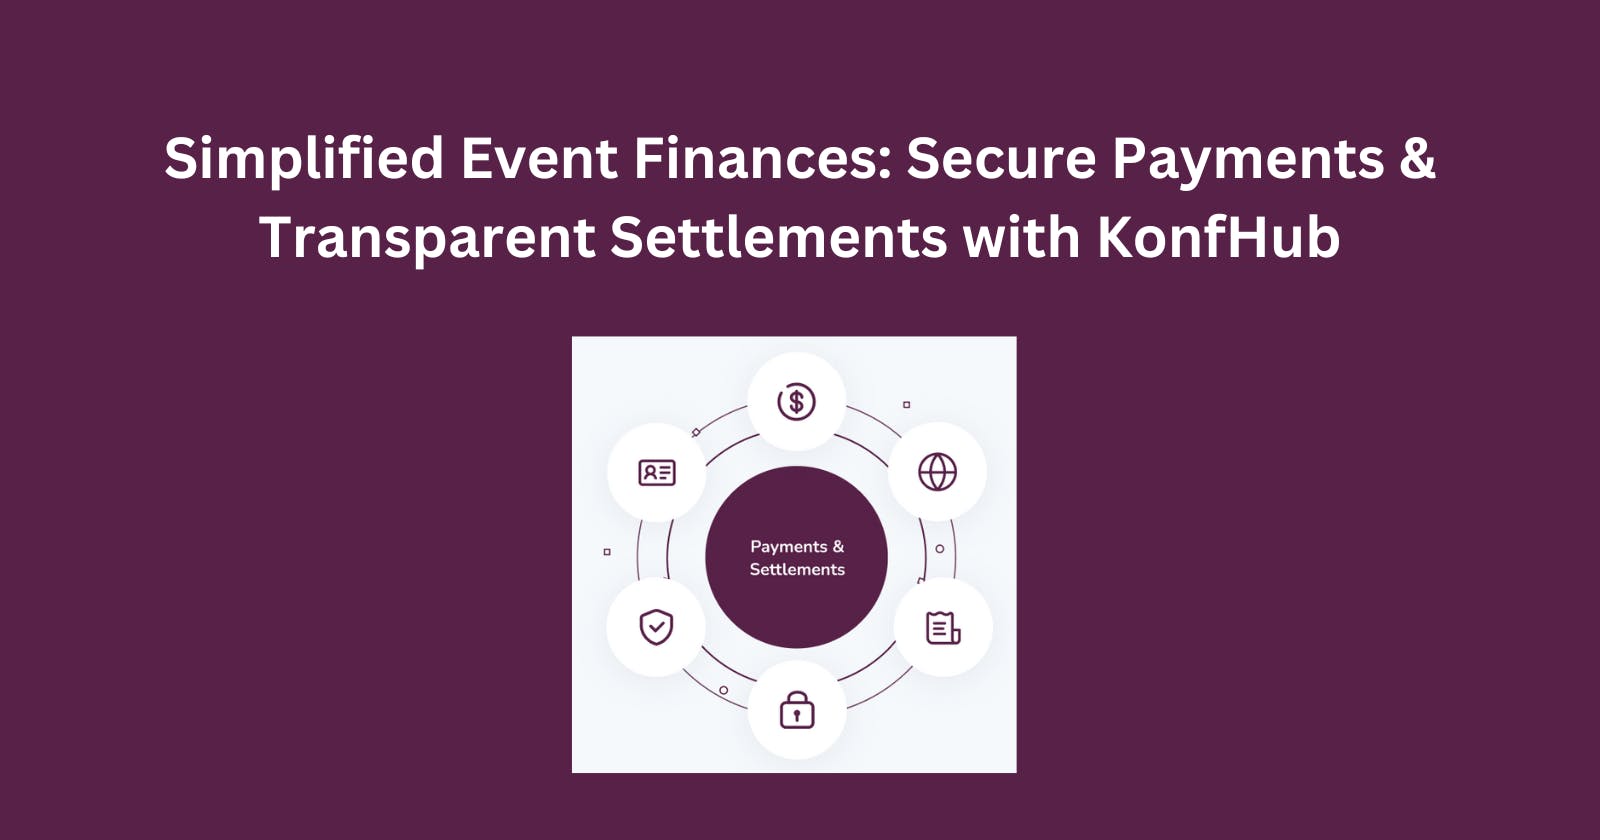 Simplified Event Finances: Secure Payments & Transparent Settlements with KonfHub